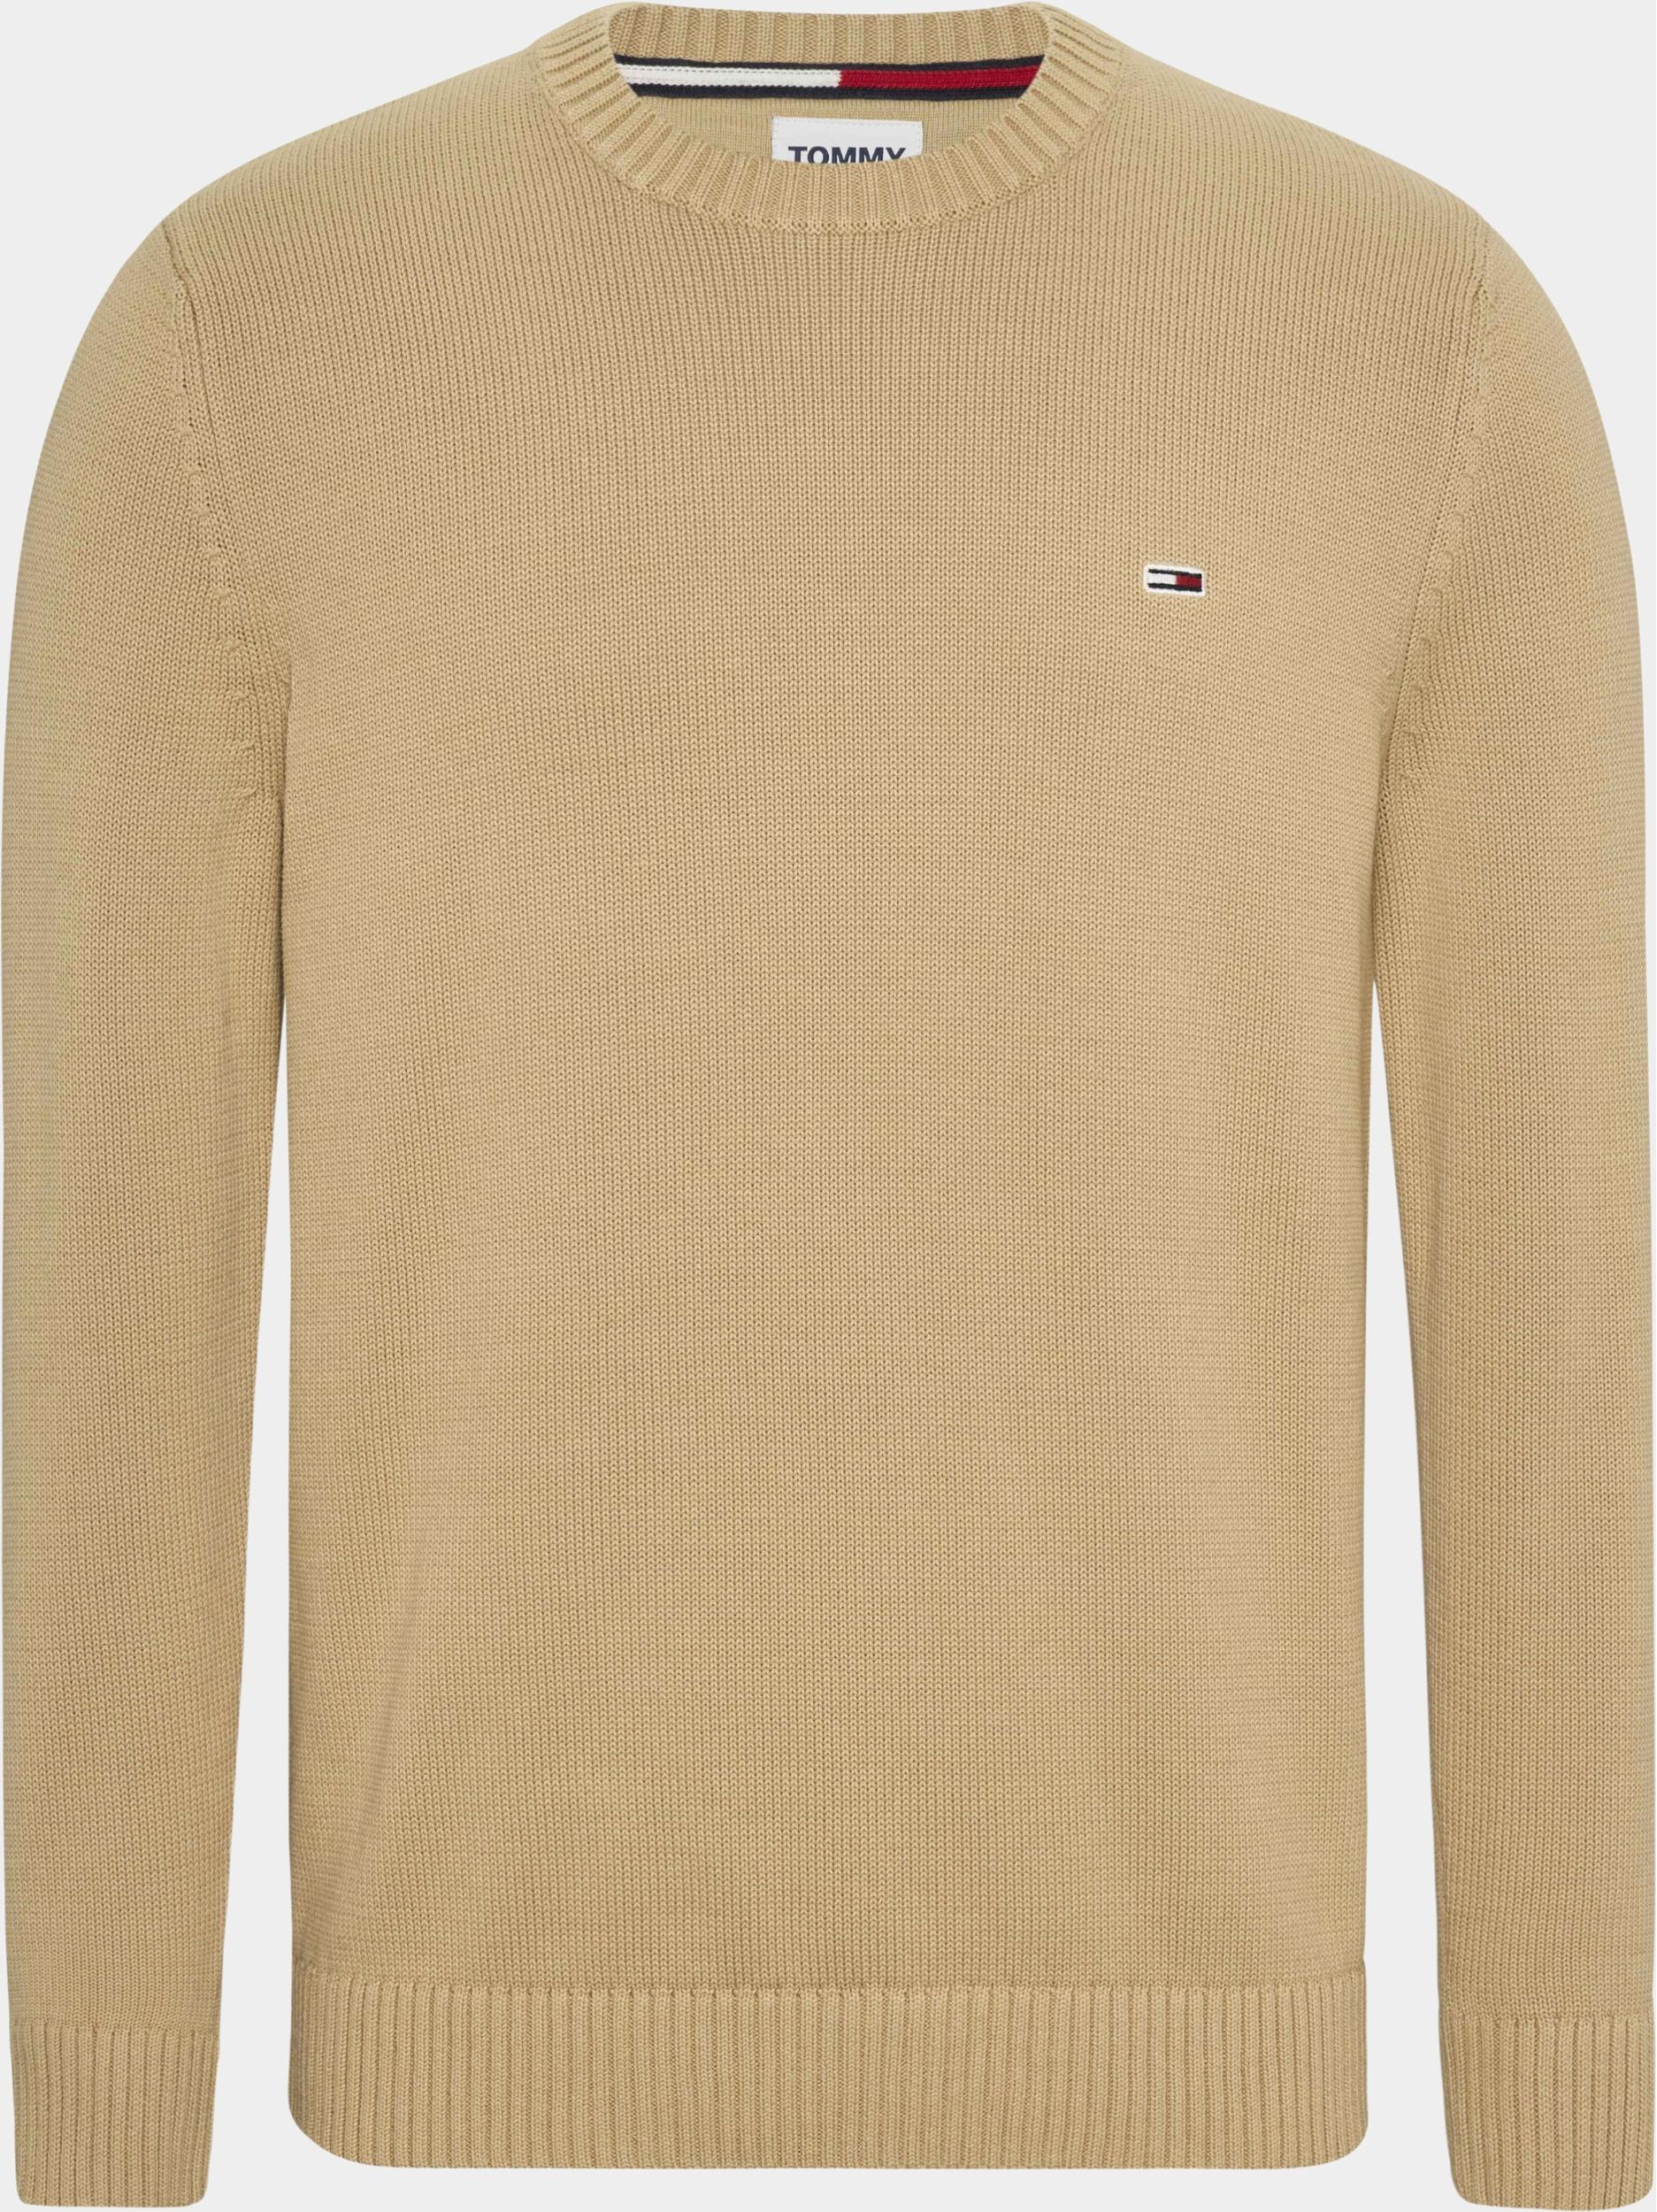 Tommy Jeans Pullover Beige TJM Essential Crew Neck Sweate DM0DM11856/AB0 product